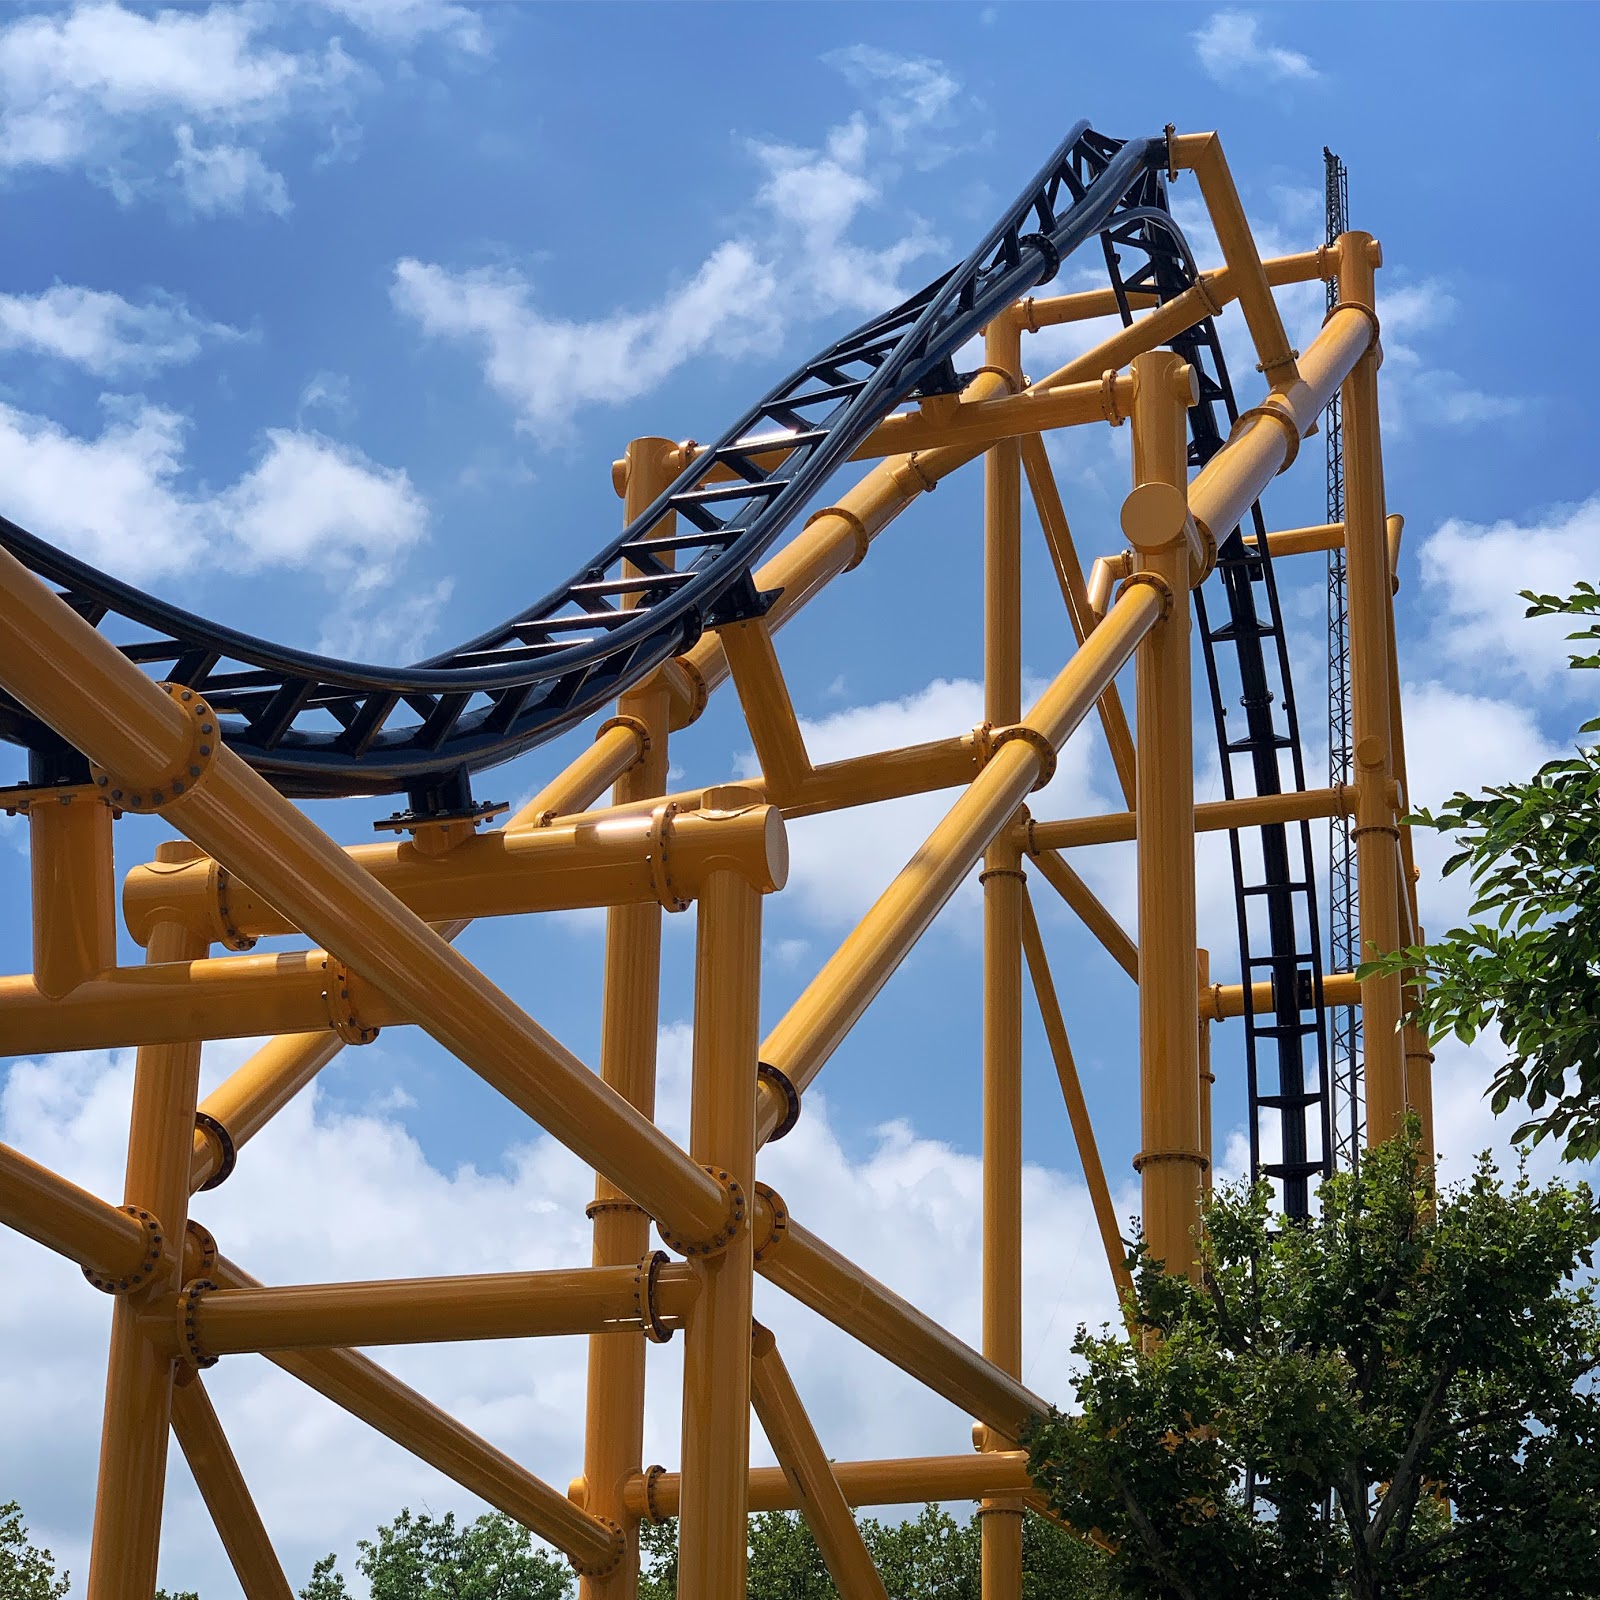 Steel Curtain Coaster Steelers Country V2 Details about   Kennywood Park 2019 Brochure guidemap 